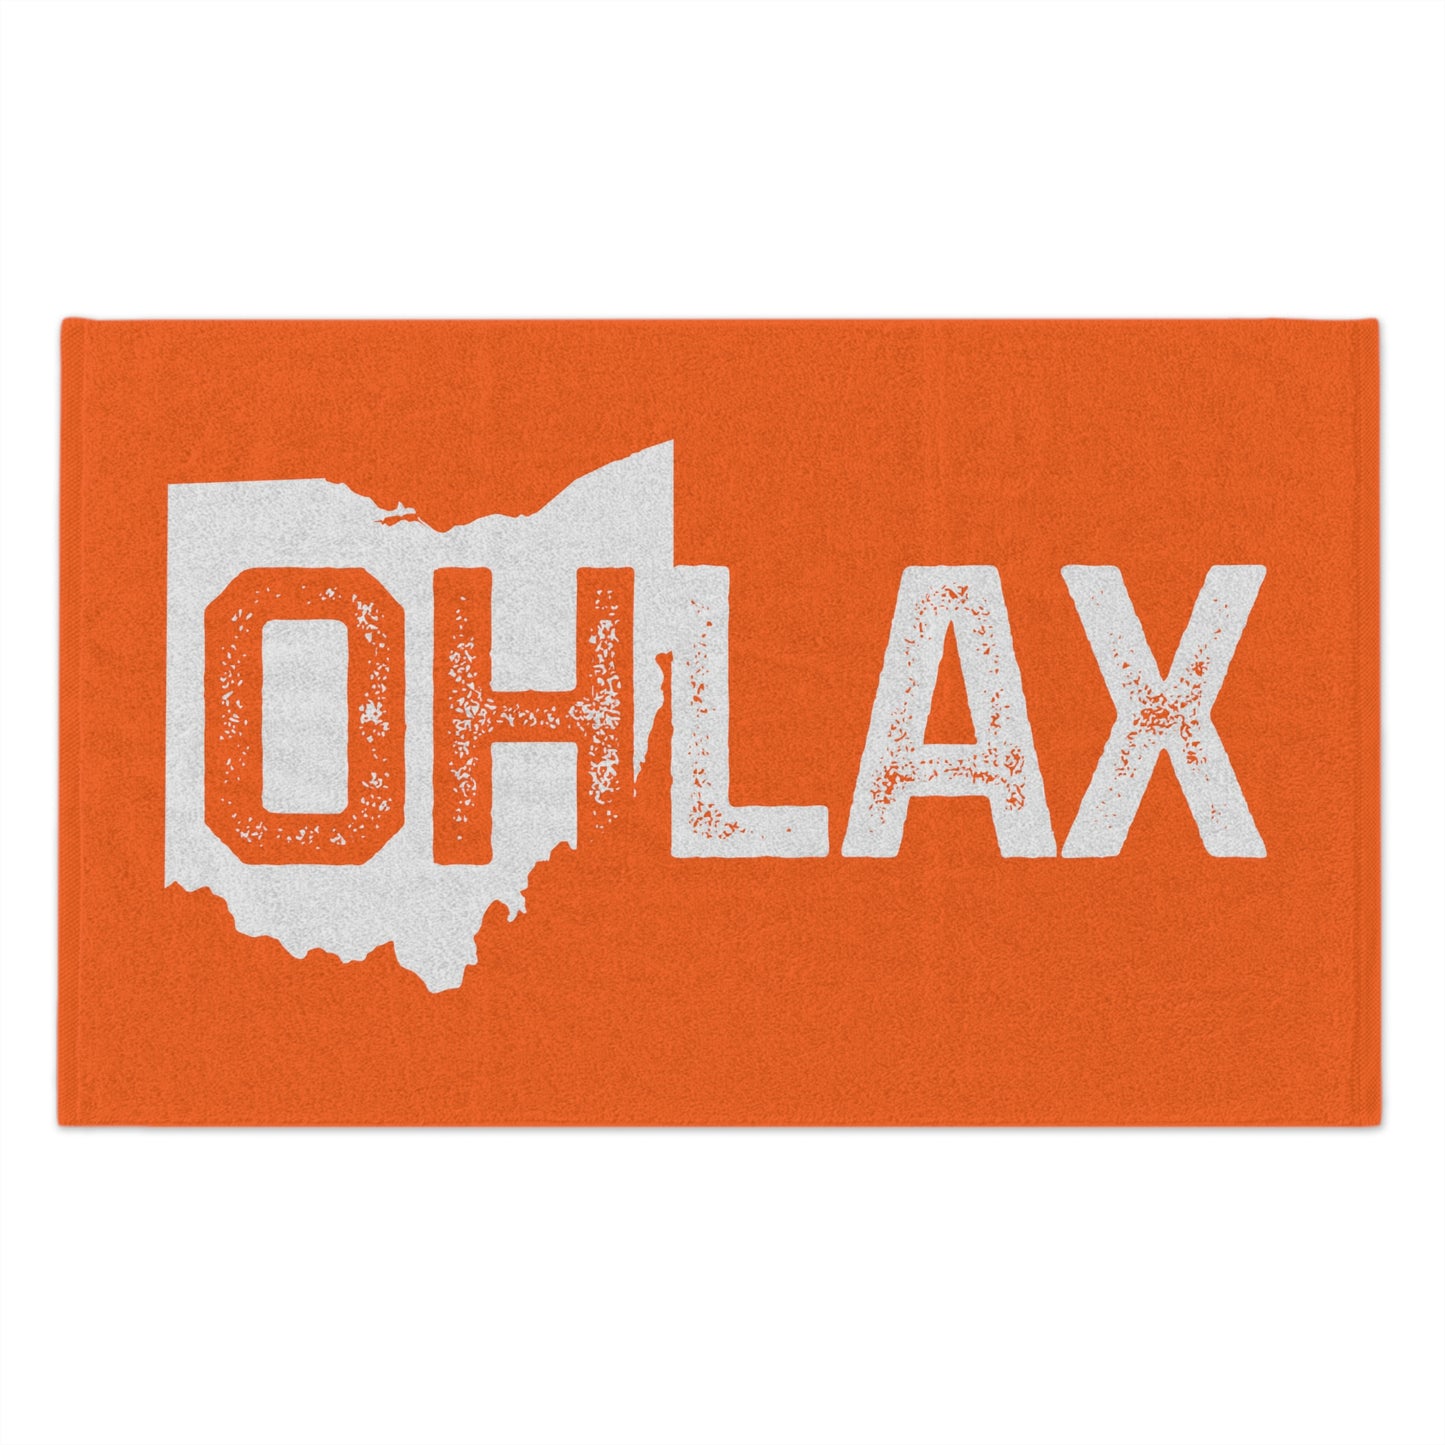 OH(STATE SHAPE) LAX-Rally Towel, 11x18